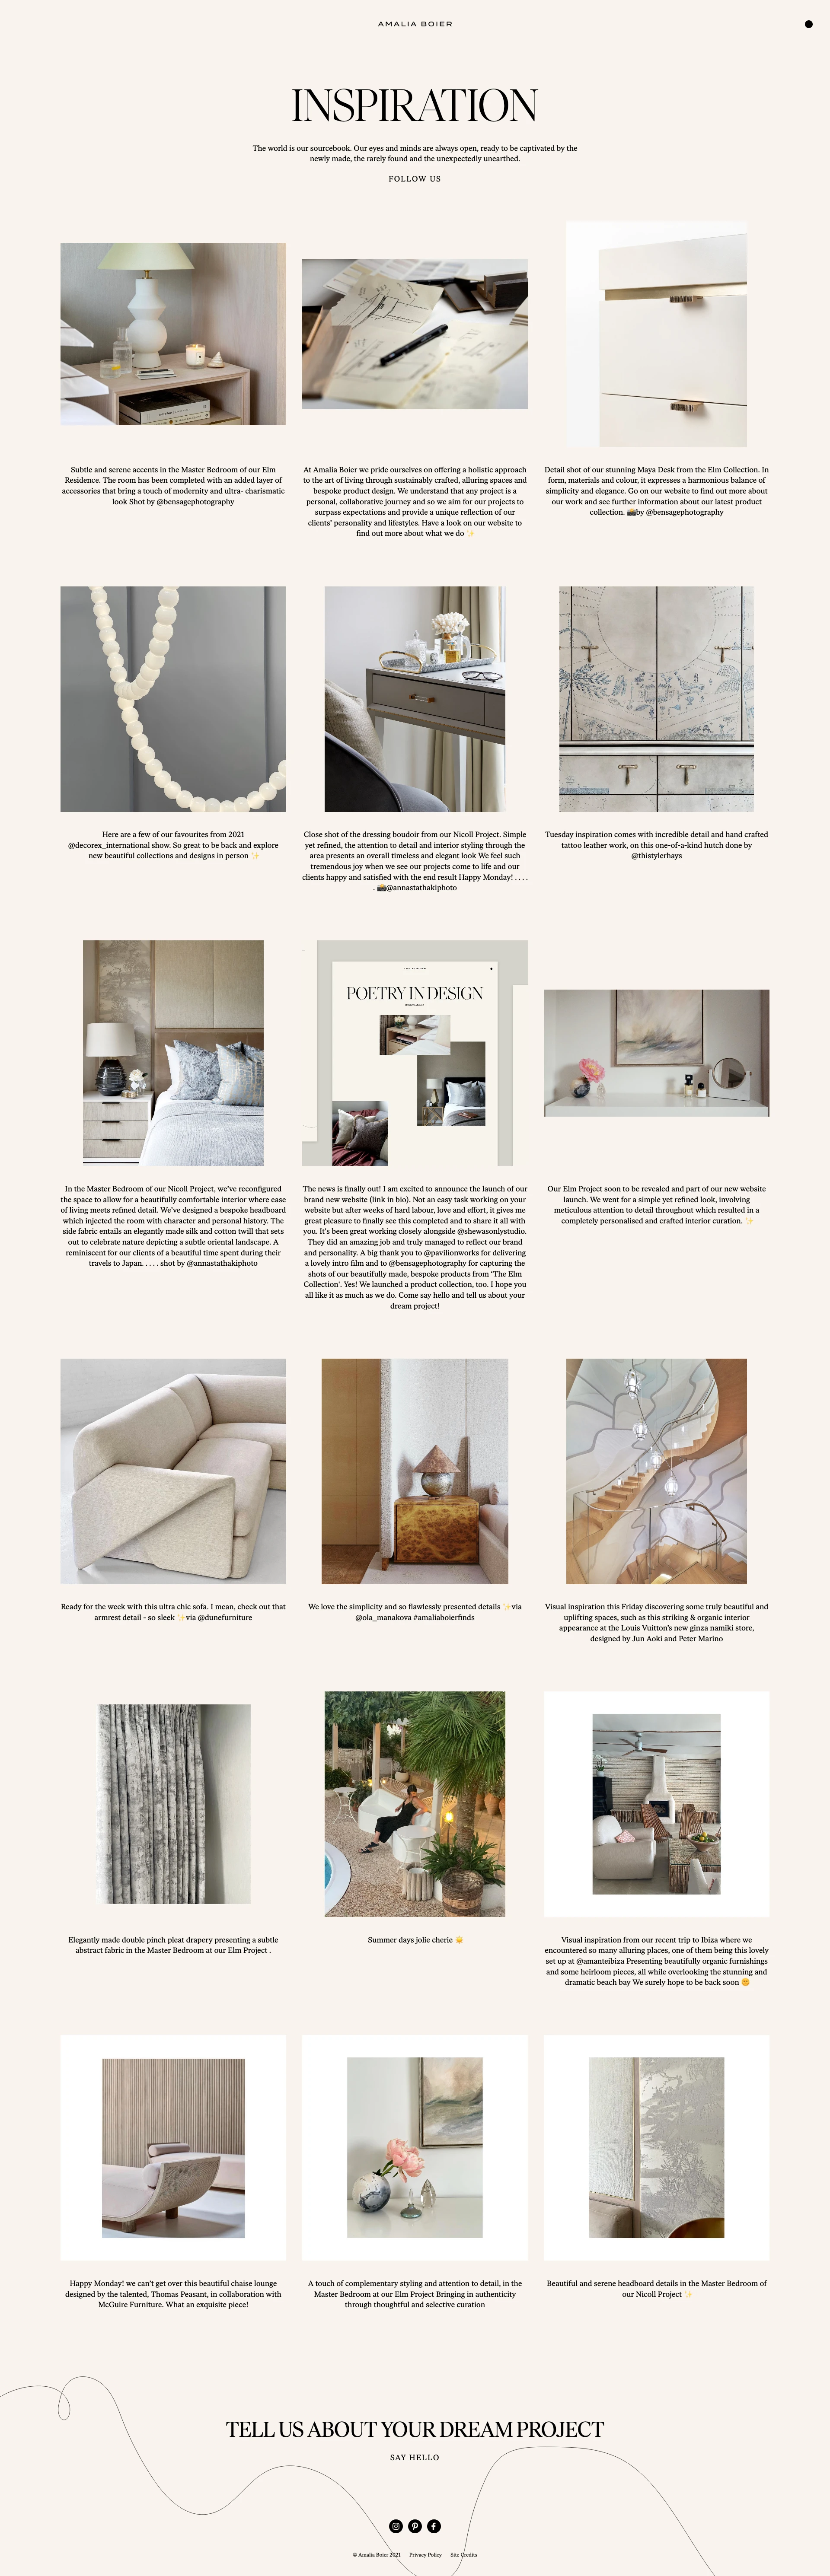 Amalia Boier Landing Page Example: A London-based interior designer with an intuitive understanding of luxury design at the highest levels, creating exquisite, couture interiors.